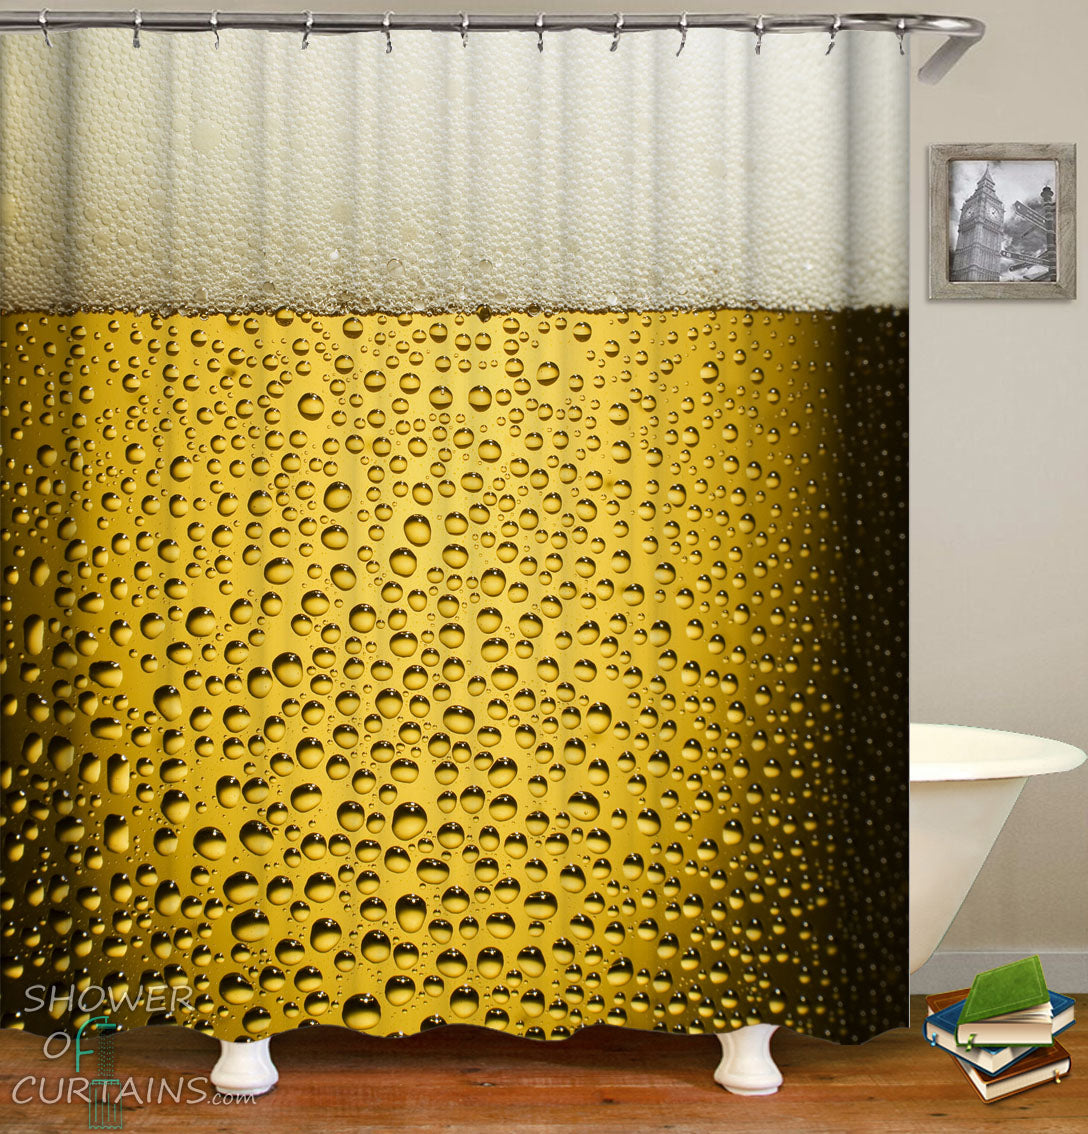 cool shower curtains